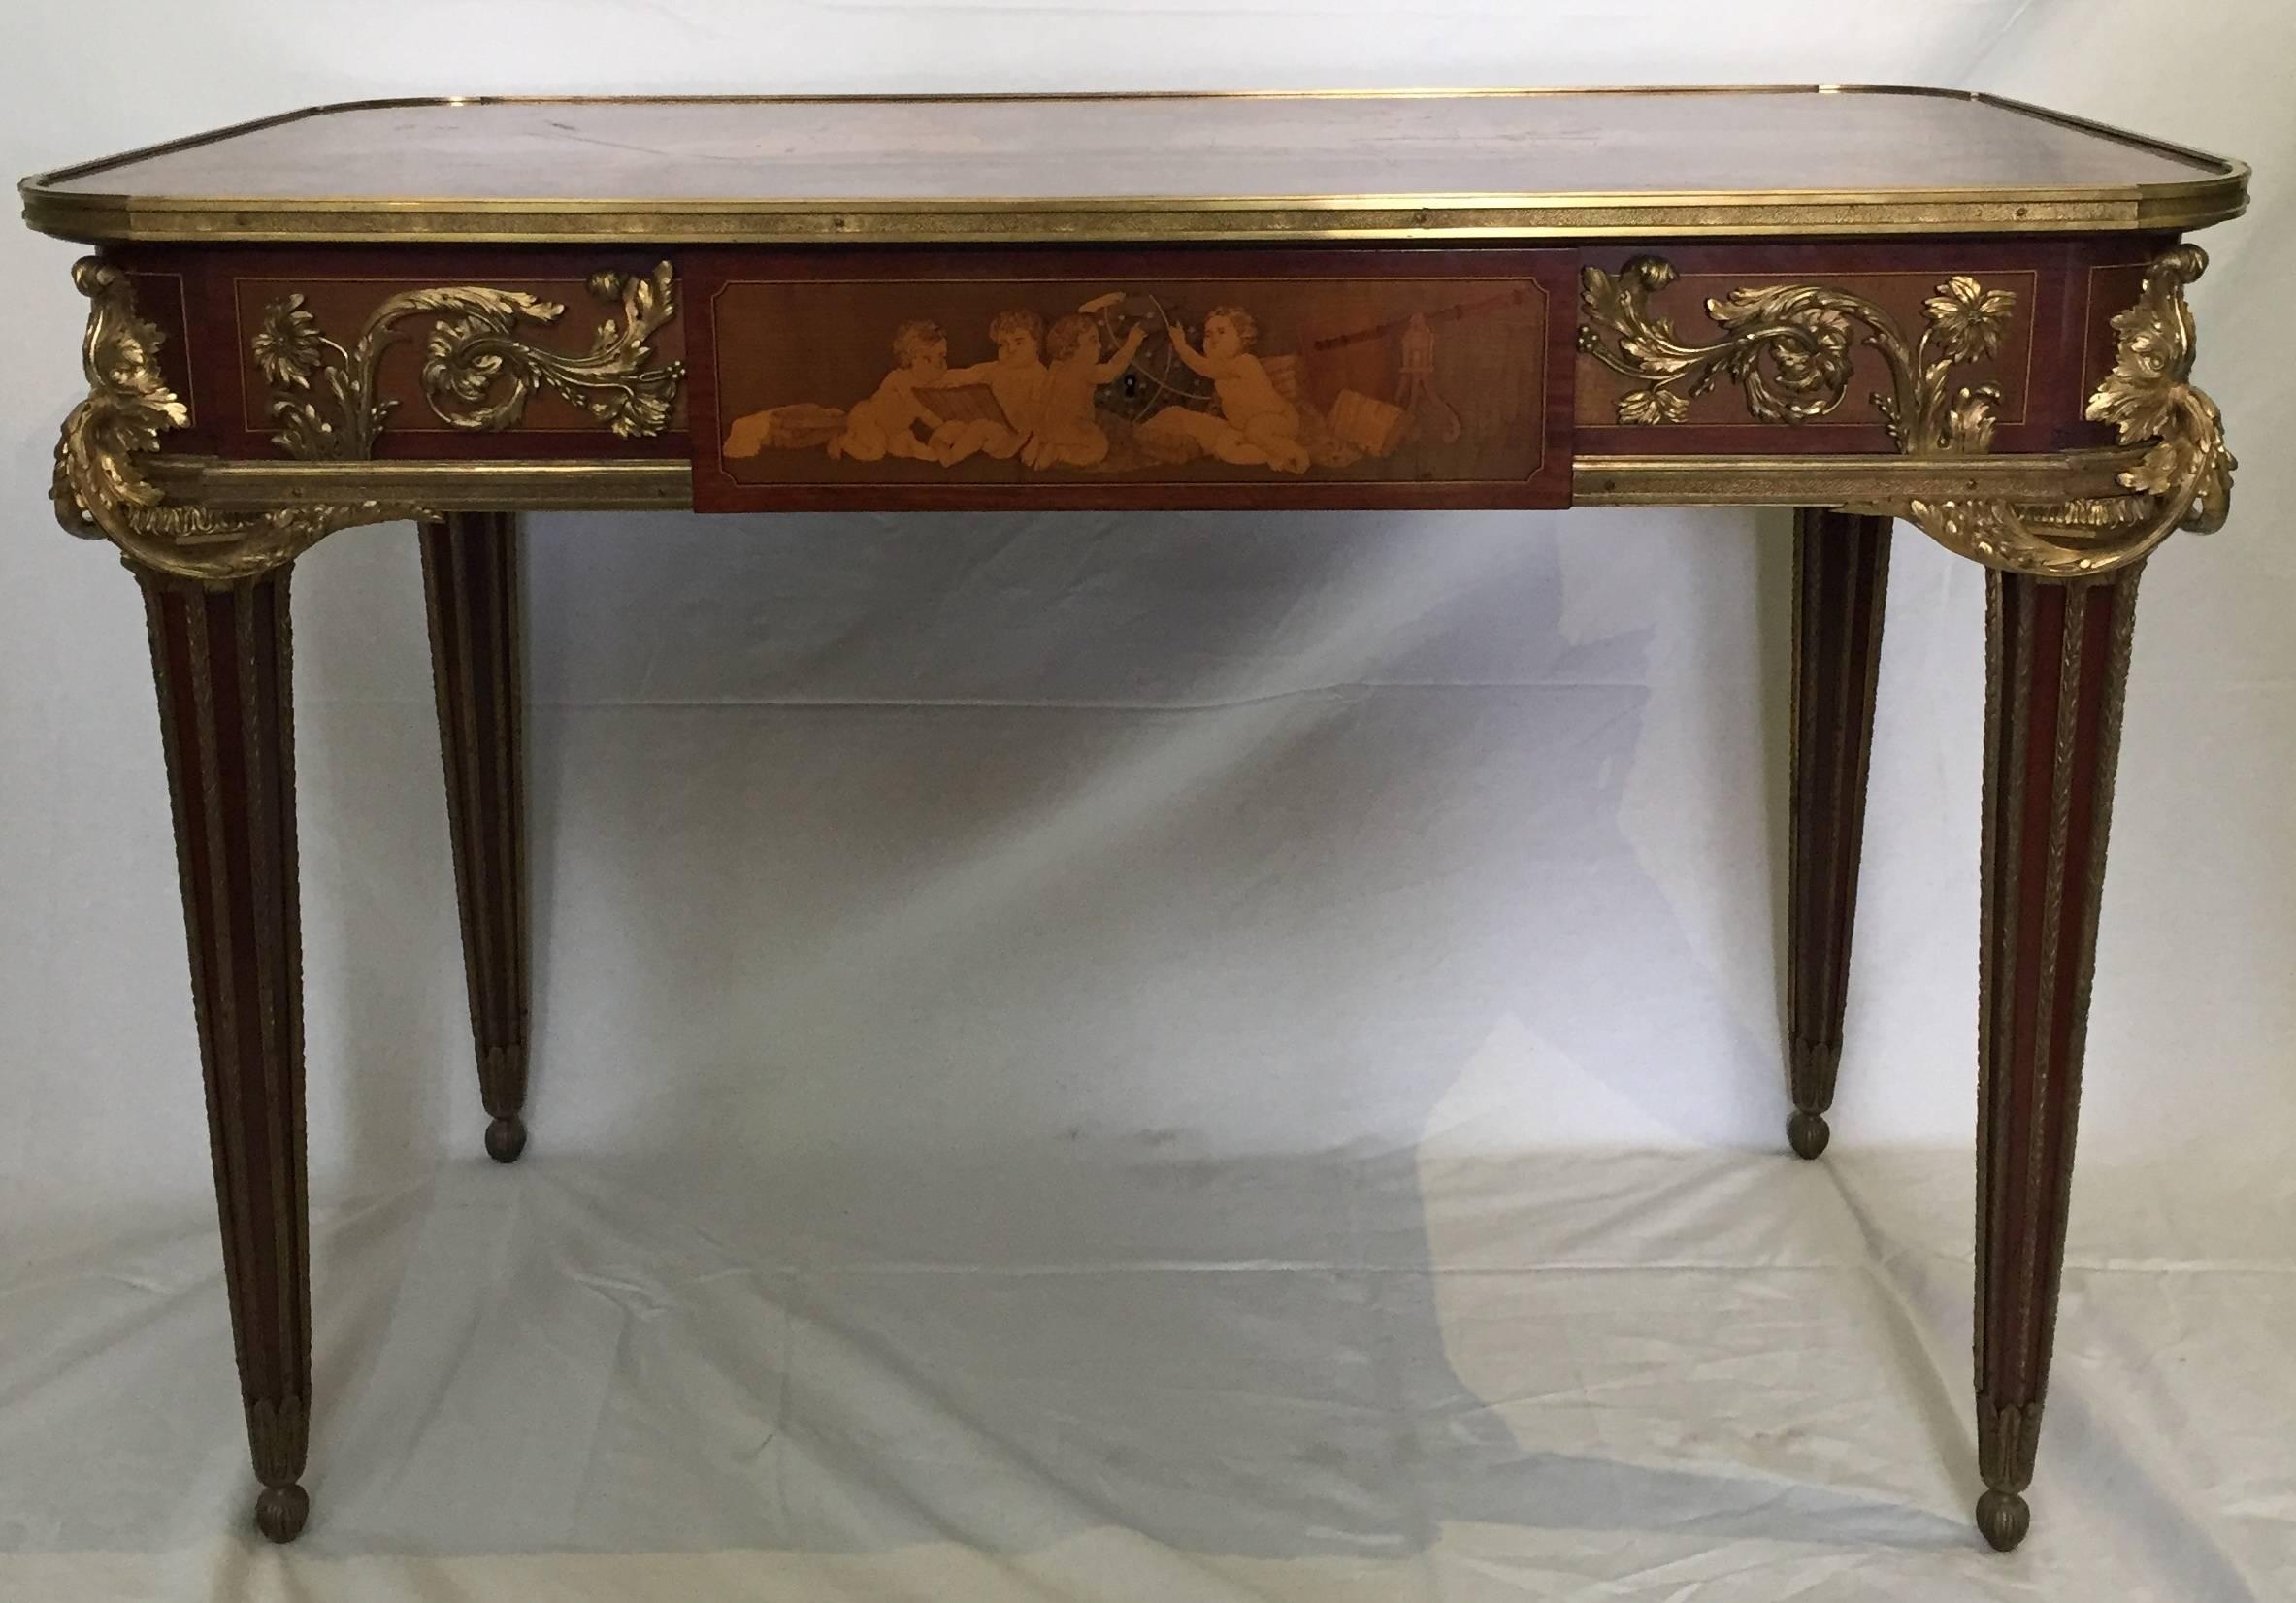 A fine quality French 19th century marquetry inlaid centre table, stamped Maison Krieger, Paris. Having wonder classical inlaid scenes to the top and sides, ormolu mounts, a single frieze drawer and raised on turned tapering fluted legs.